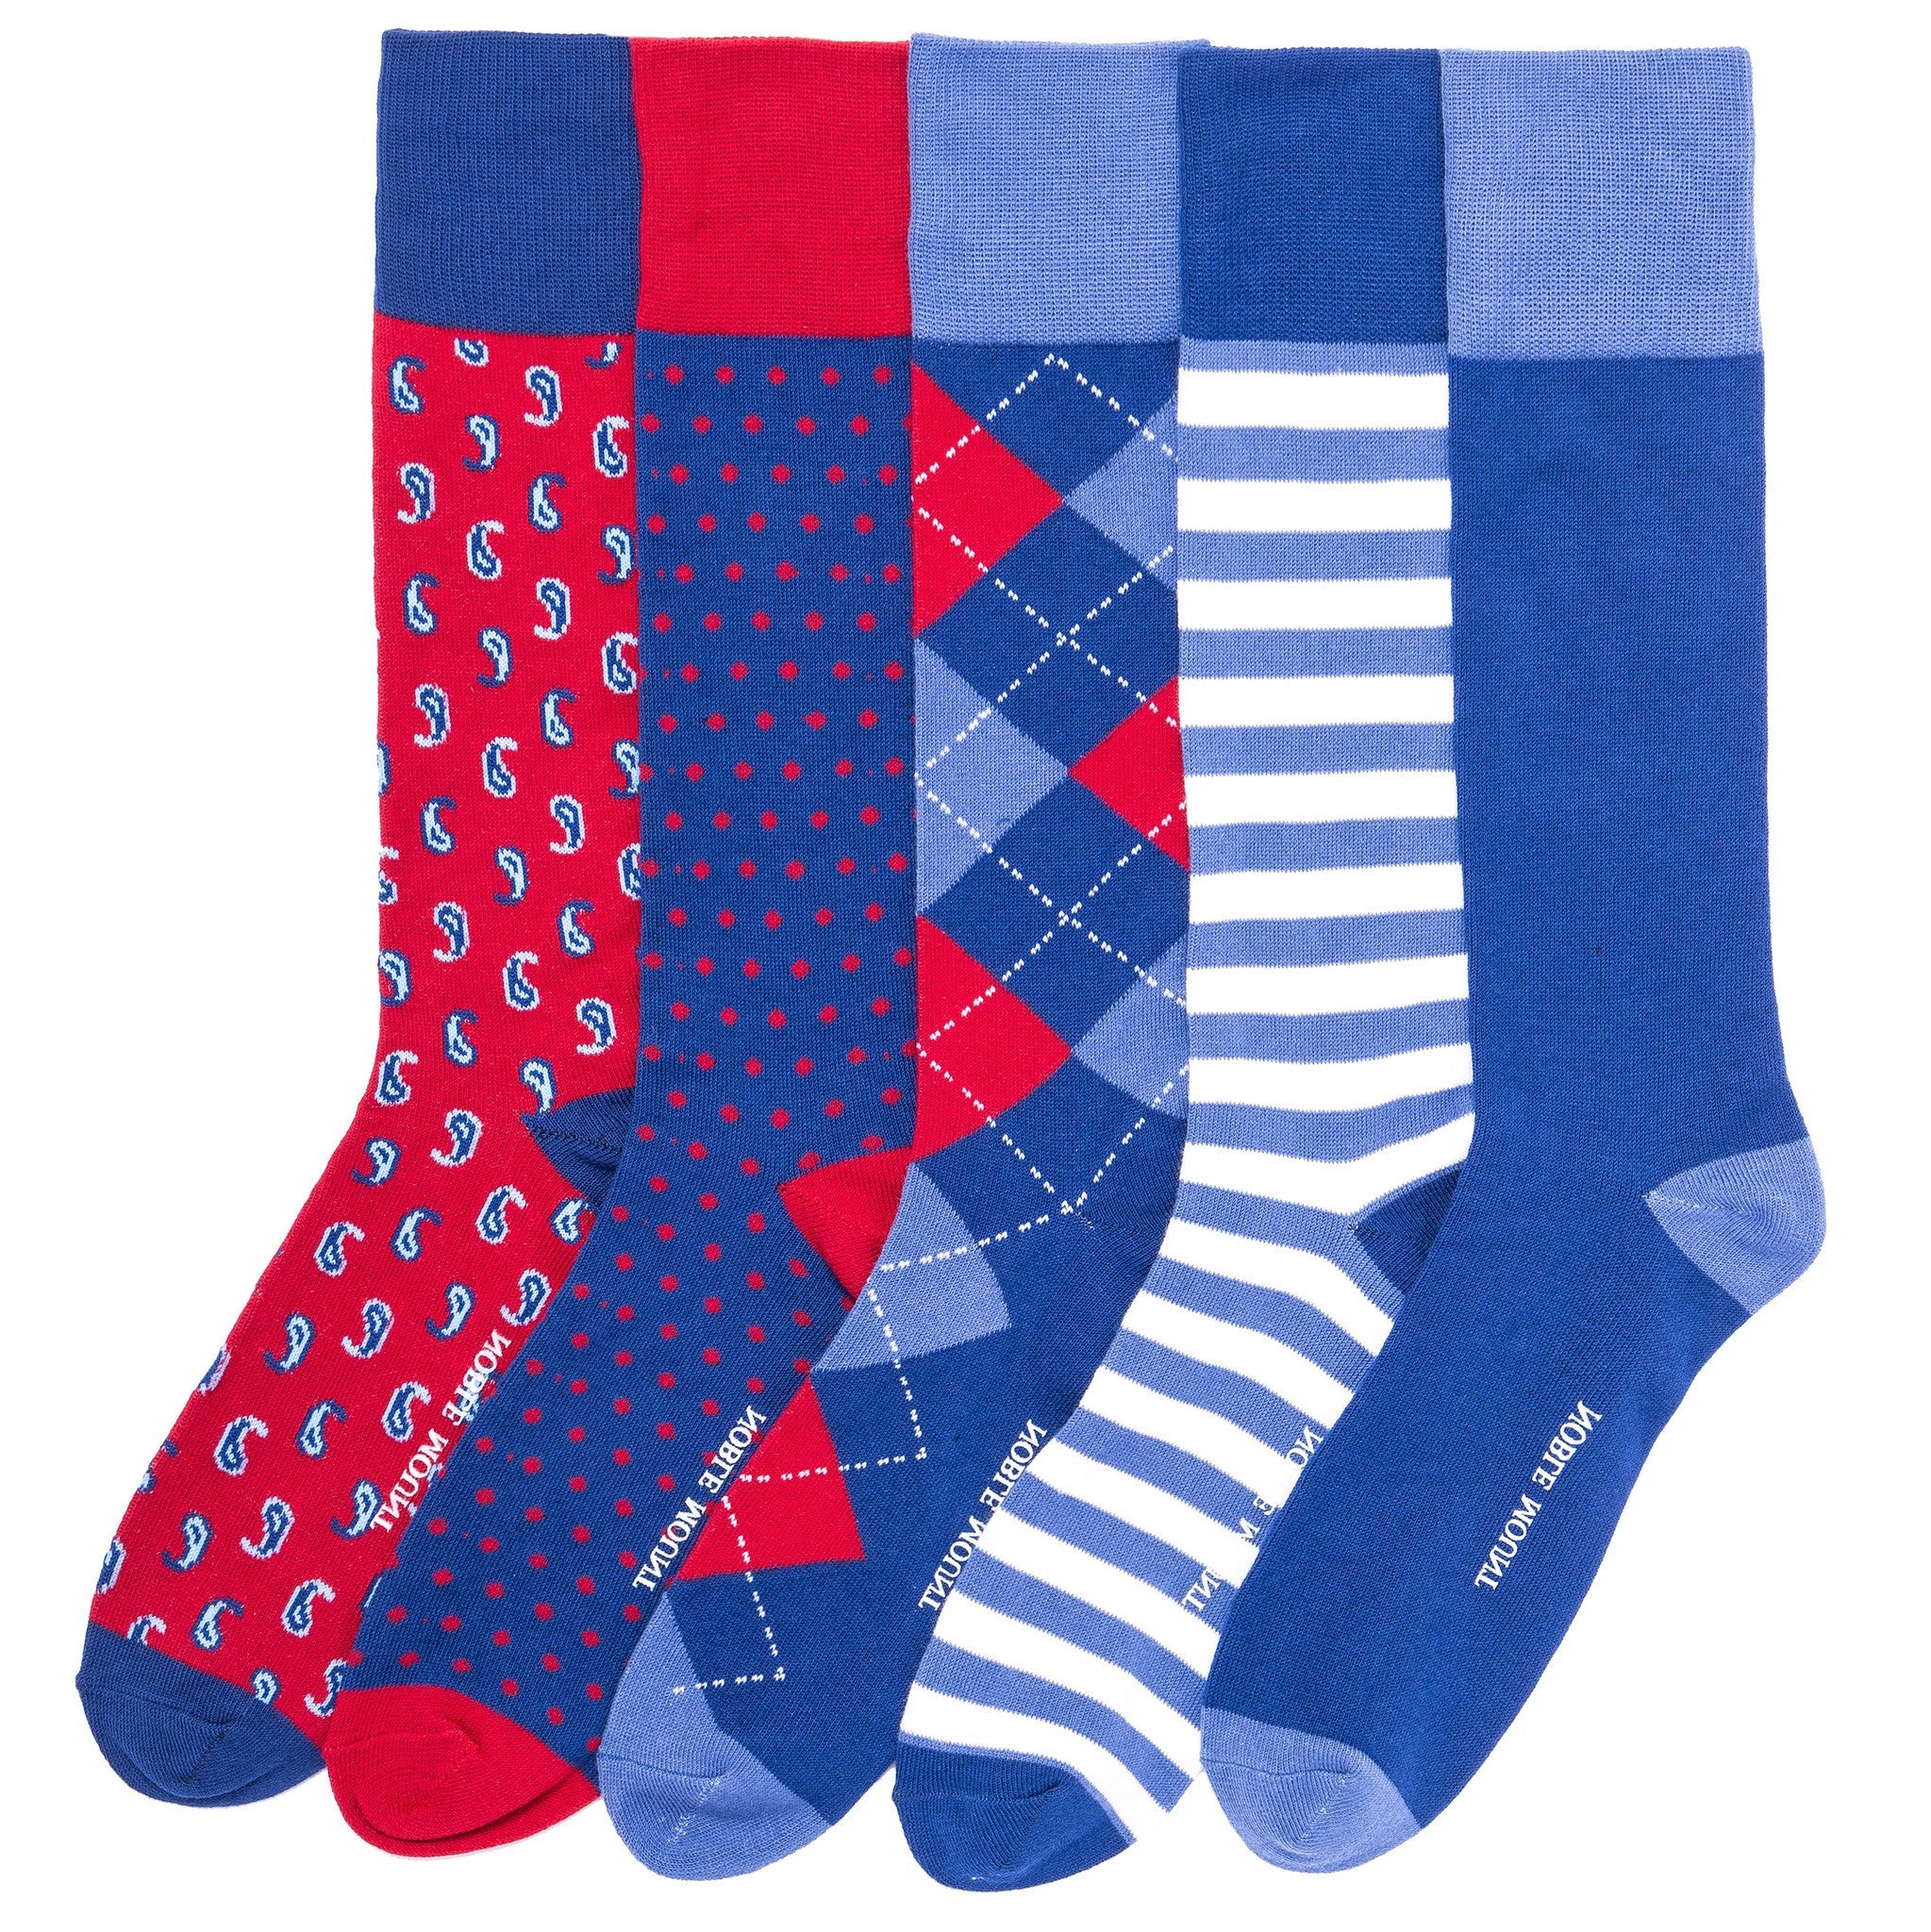 Men's Combed Cotton Weekday Dress Socks 5-Pack